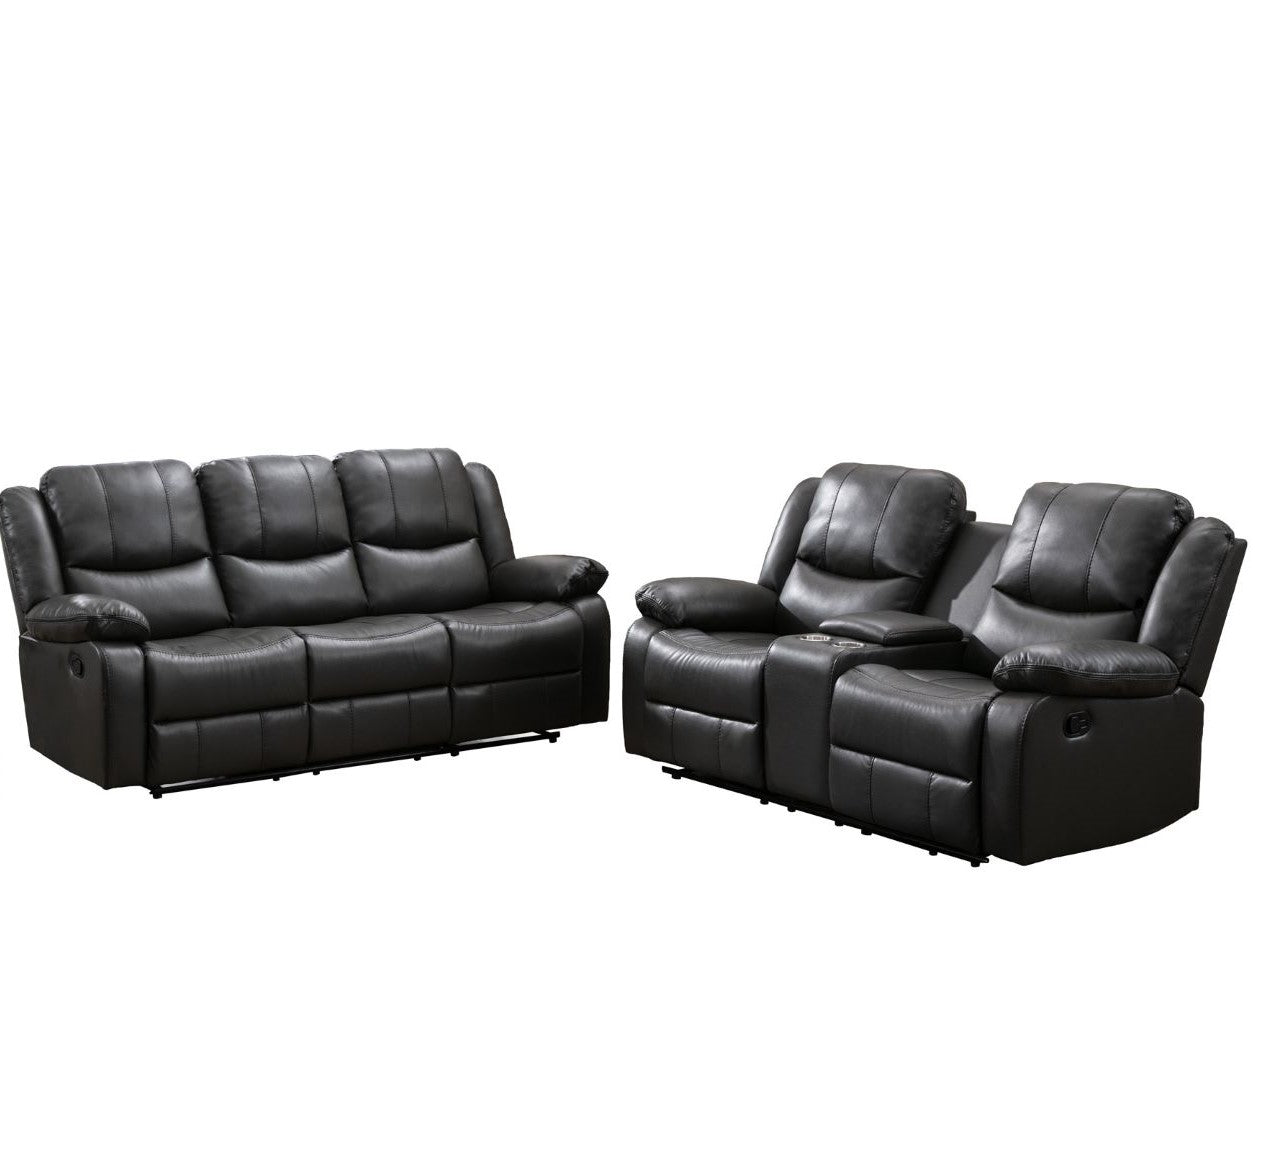 McLeod reclining sofa collection 99846GRY